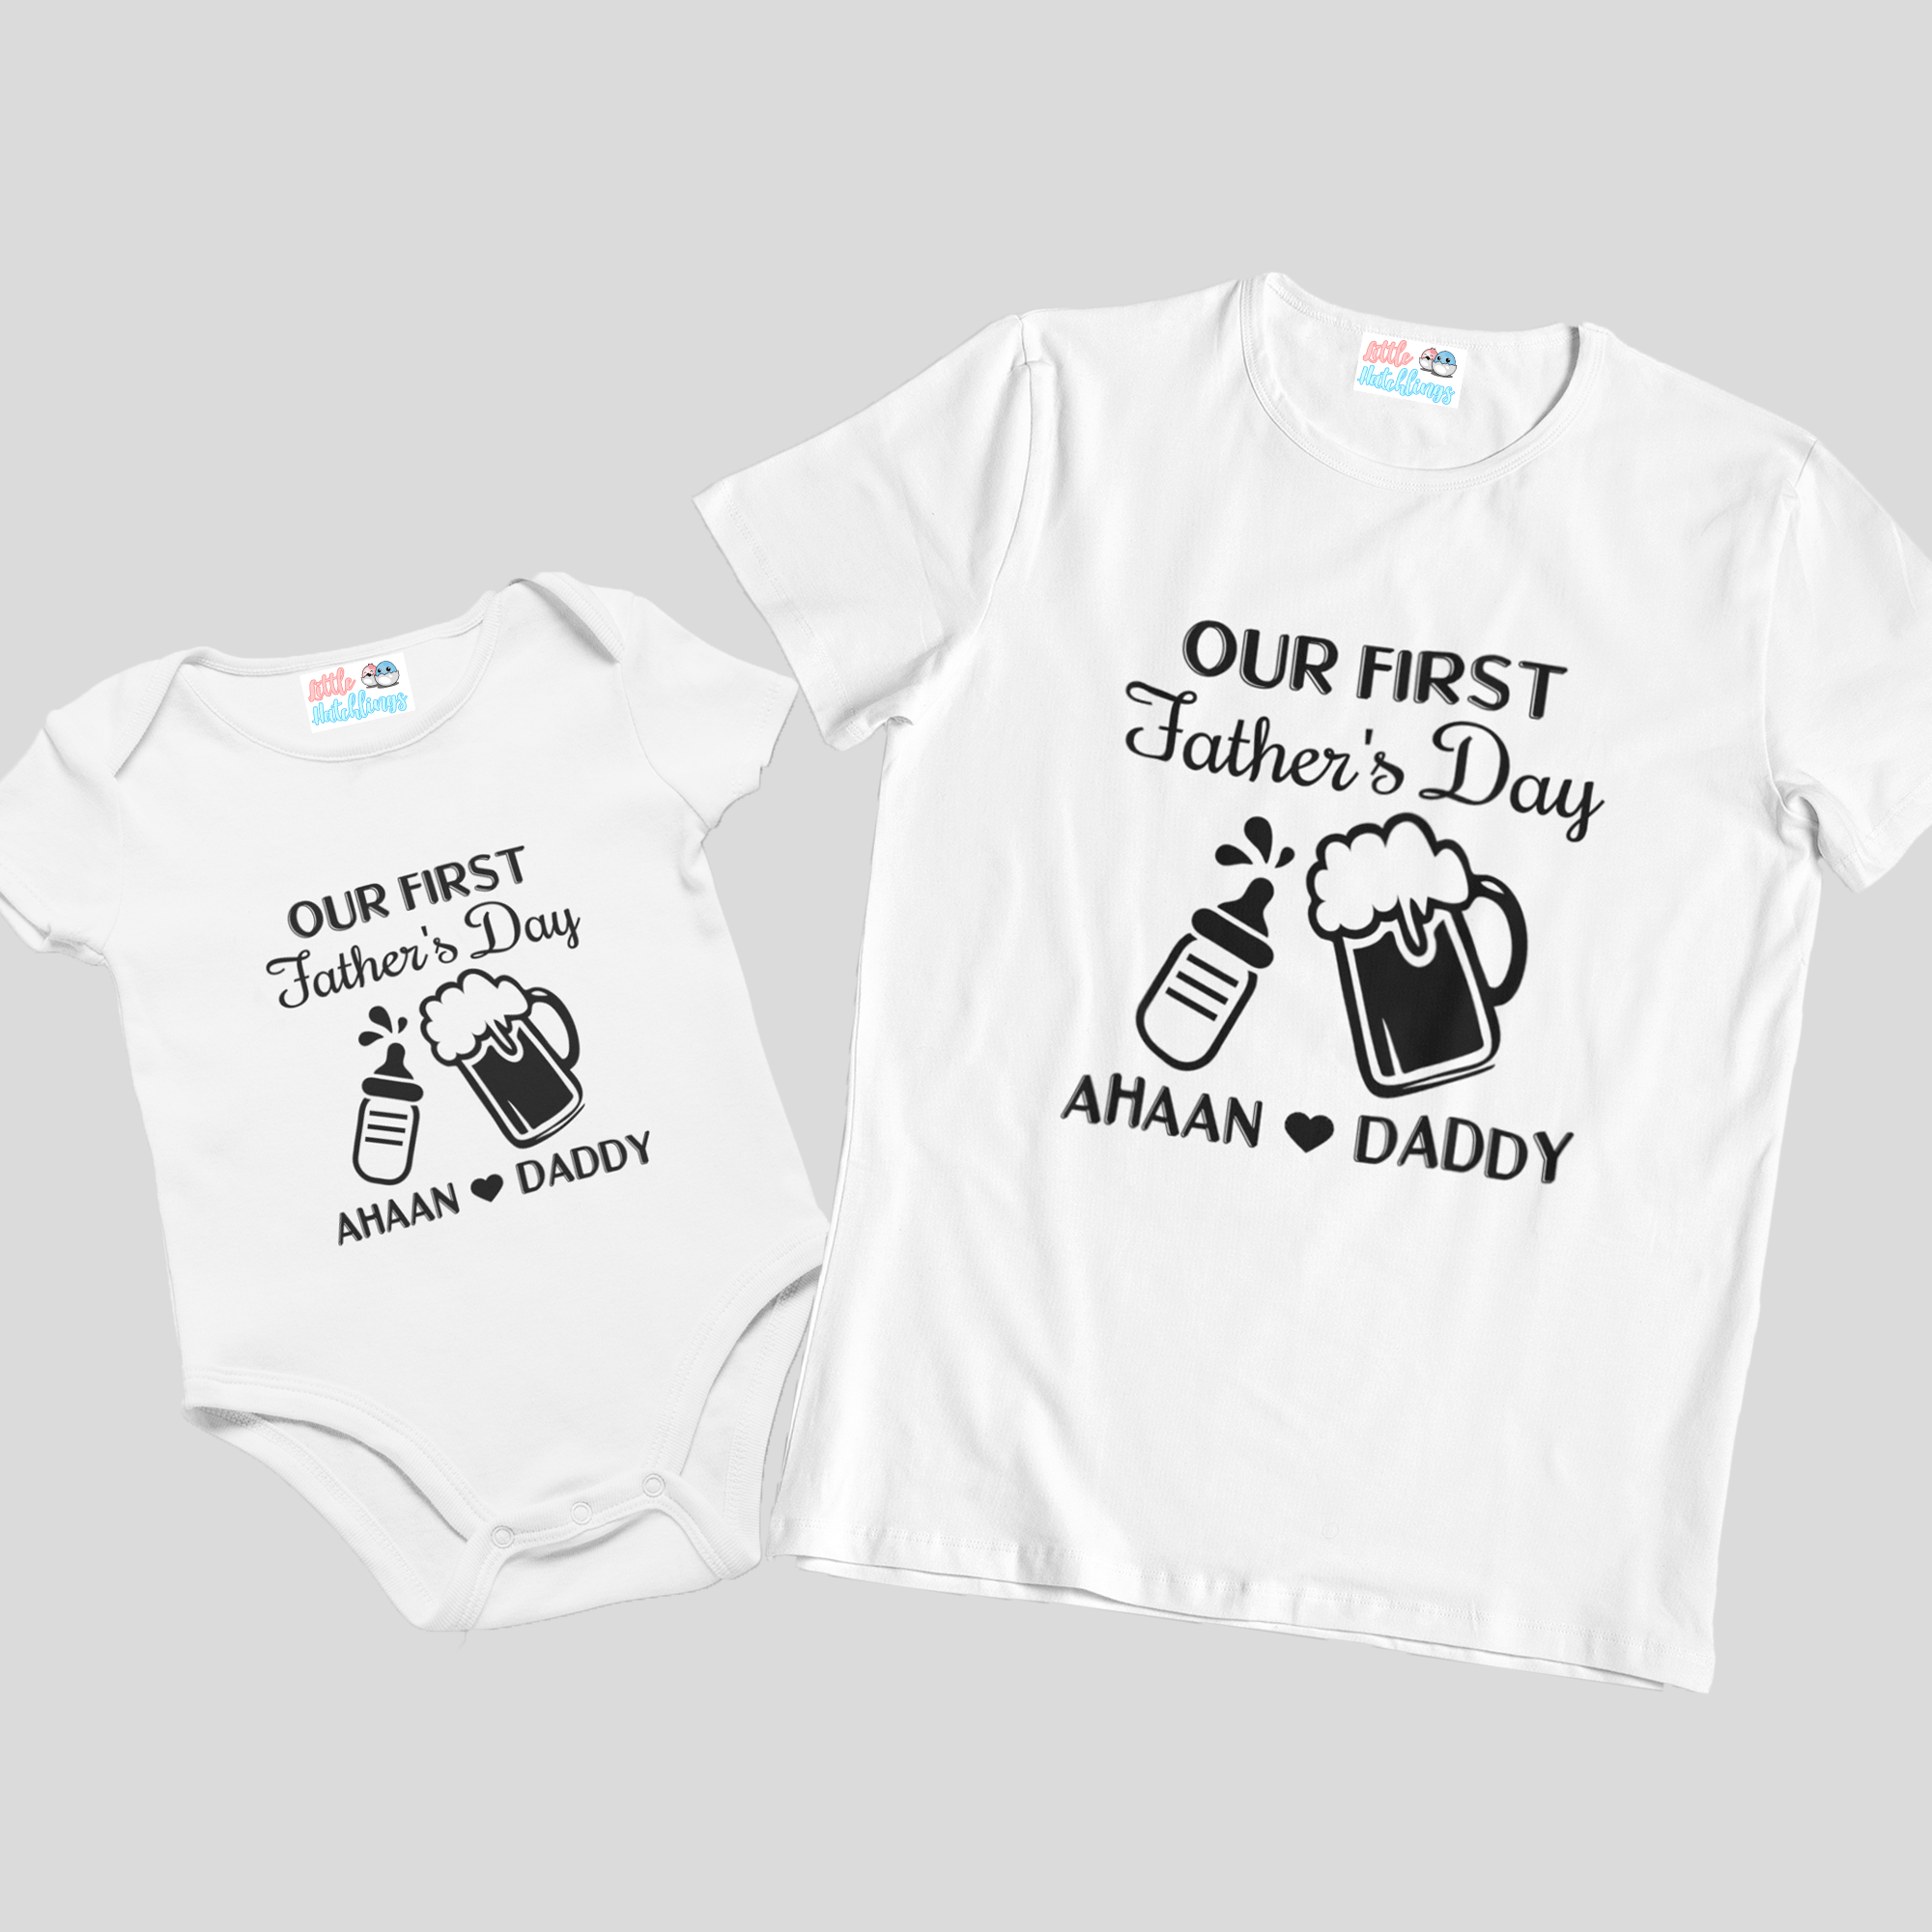 First Fathers Day Bottle Beer Mug White Combo - Adult Tshirt + Full Romper